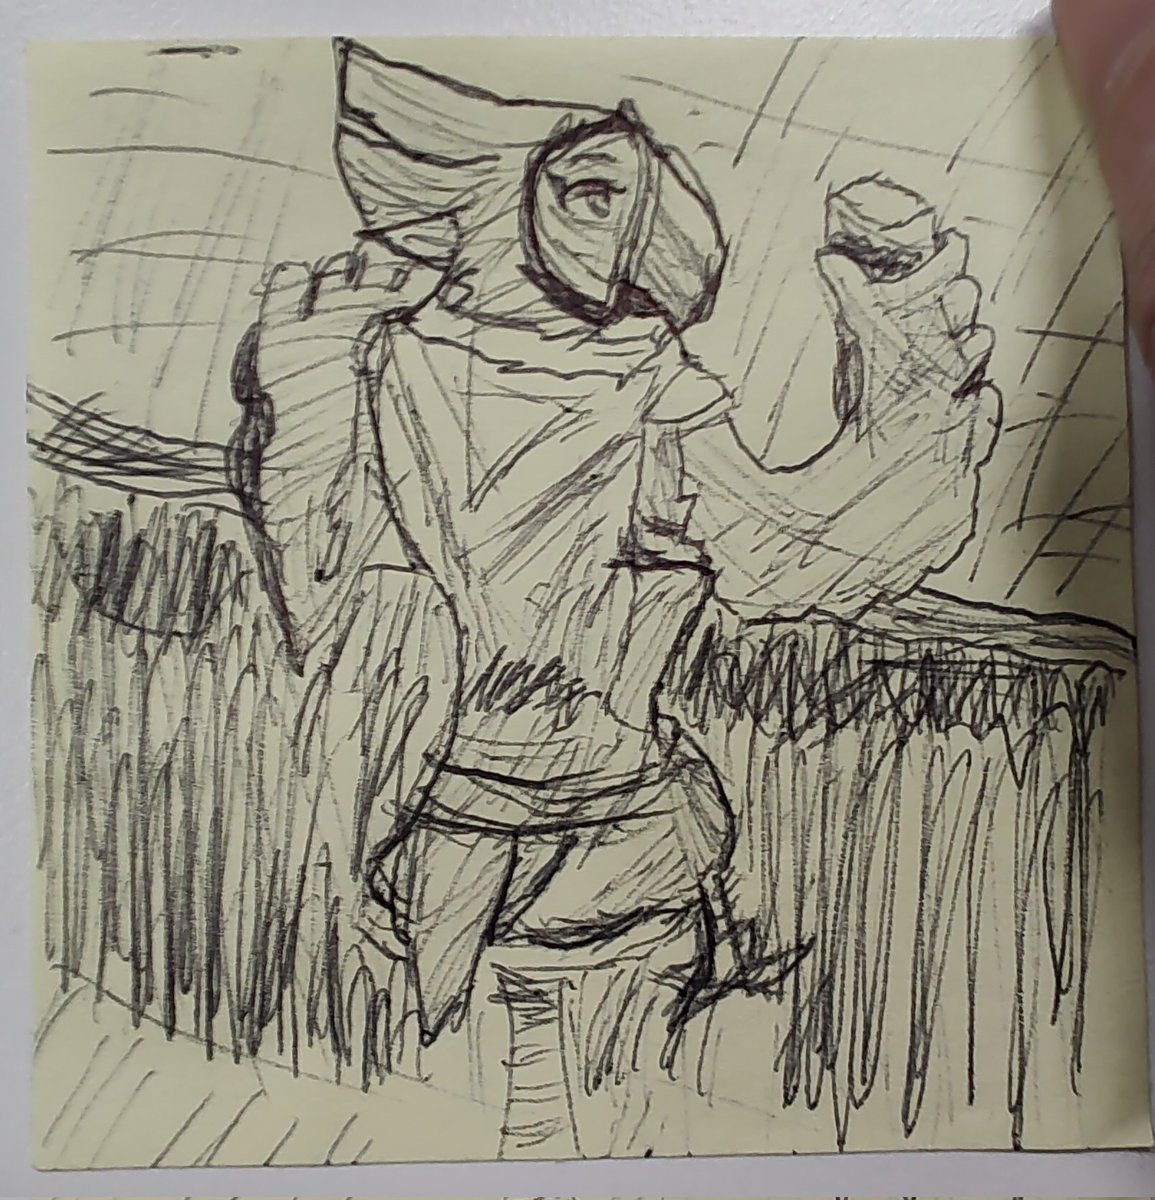 Another sticky note Kass drawing from downtime at work.